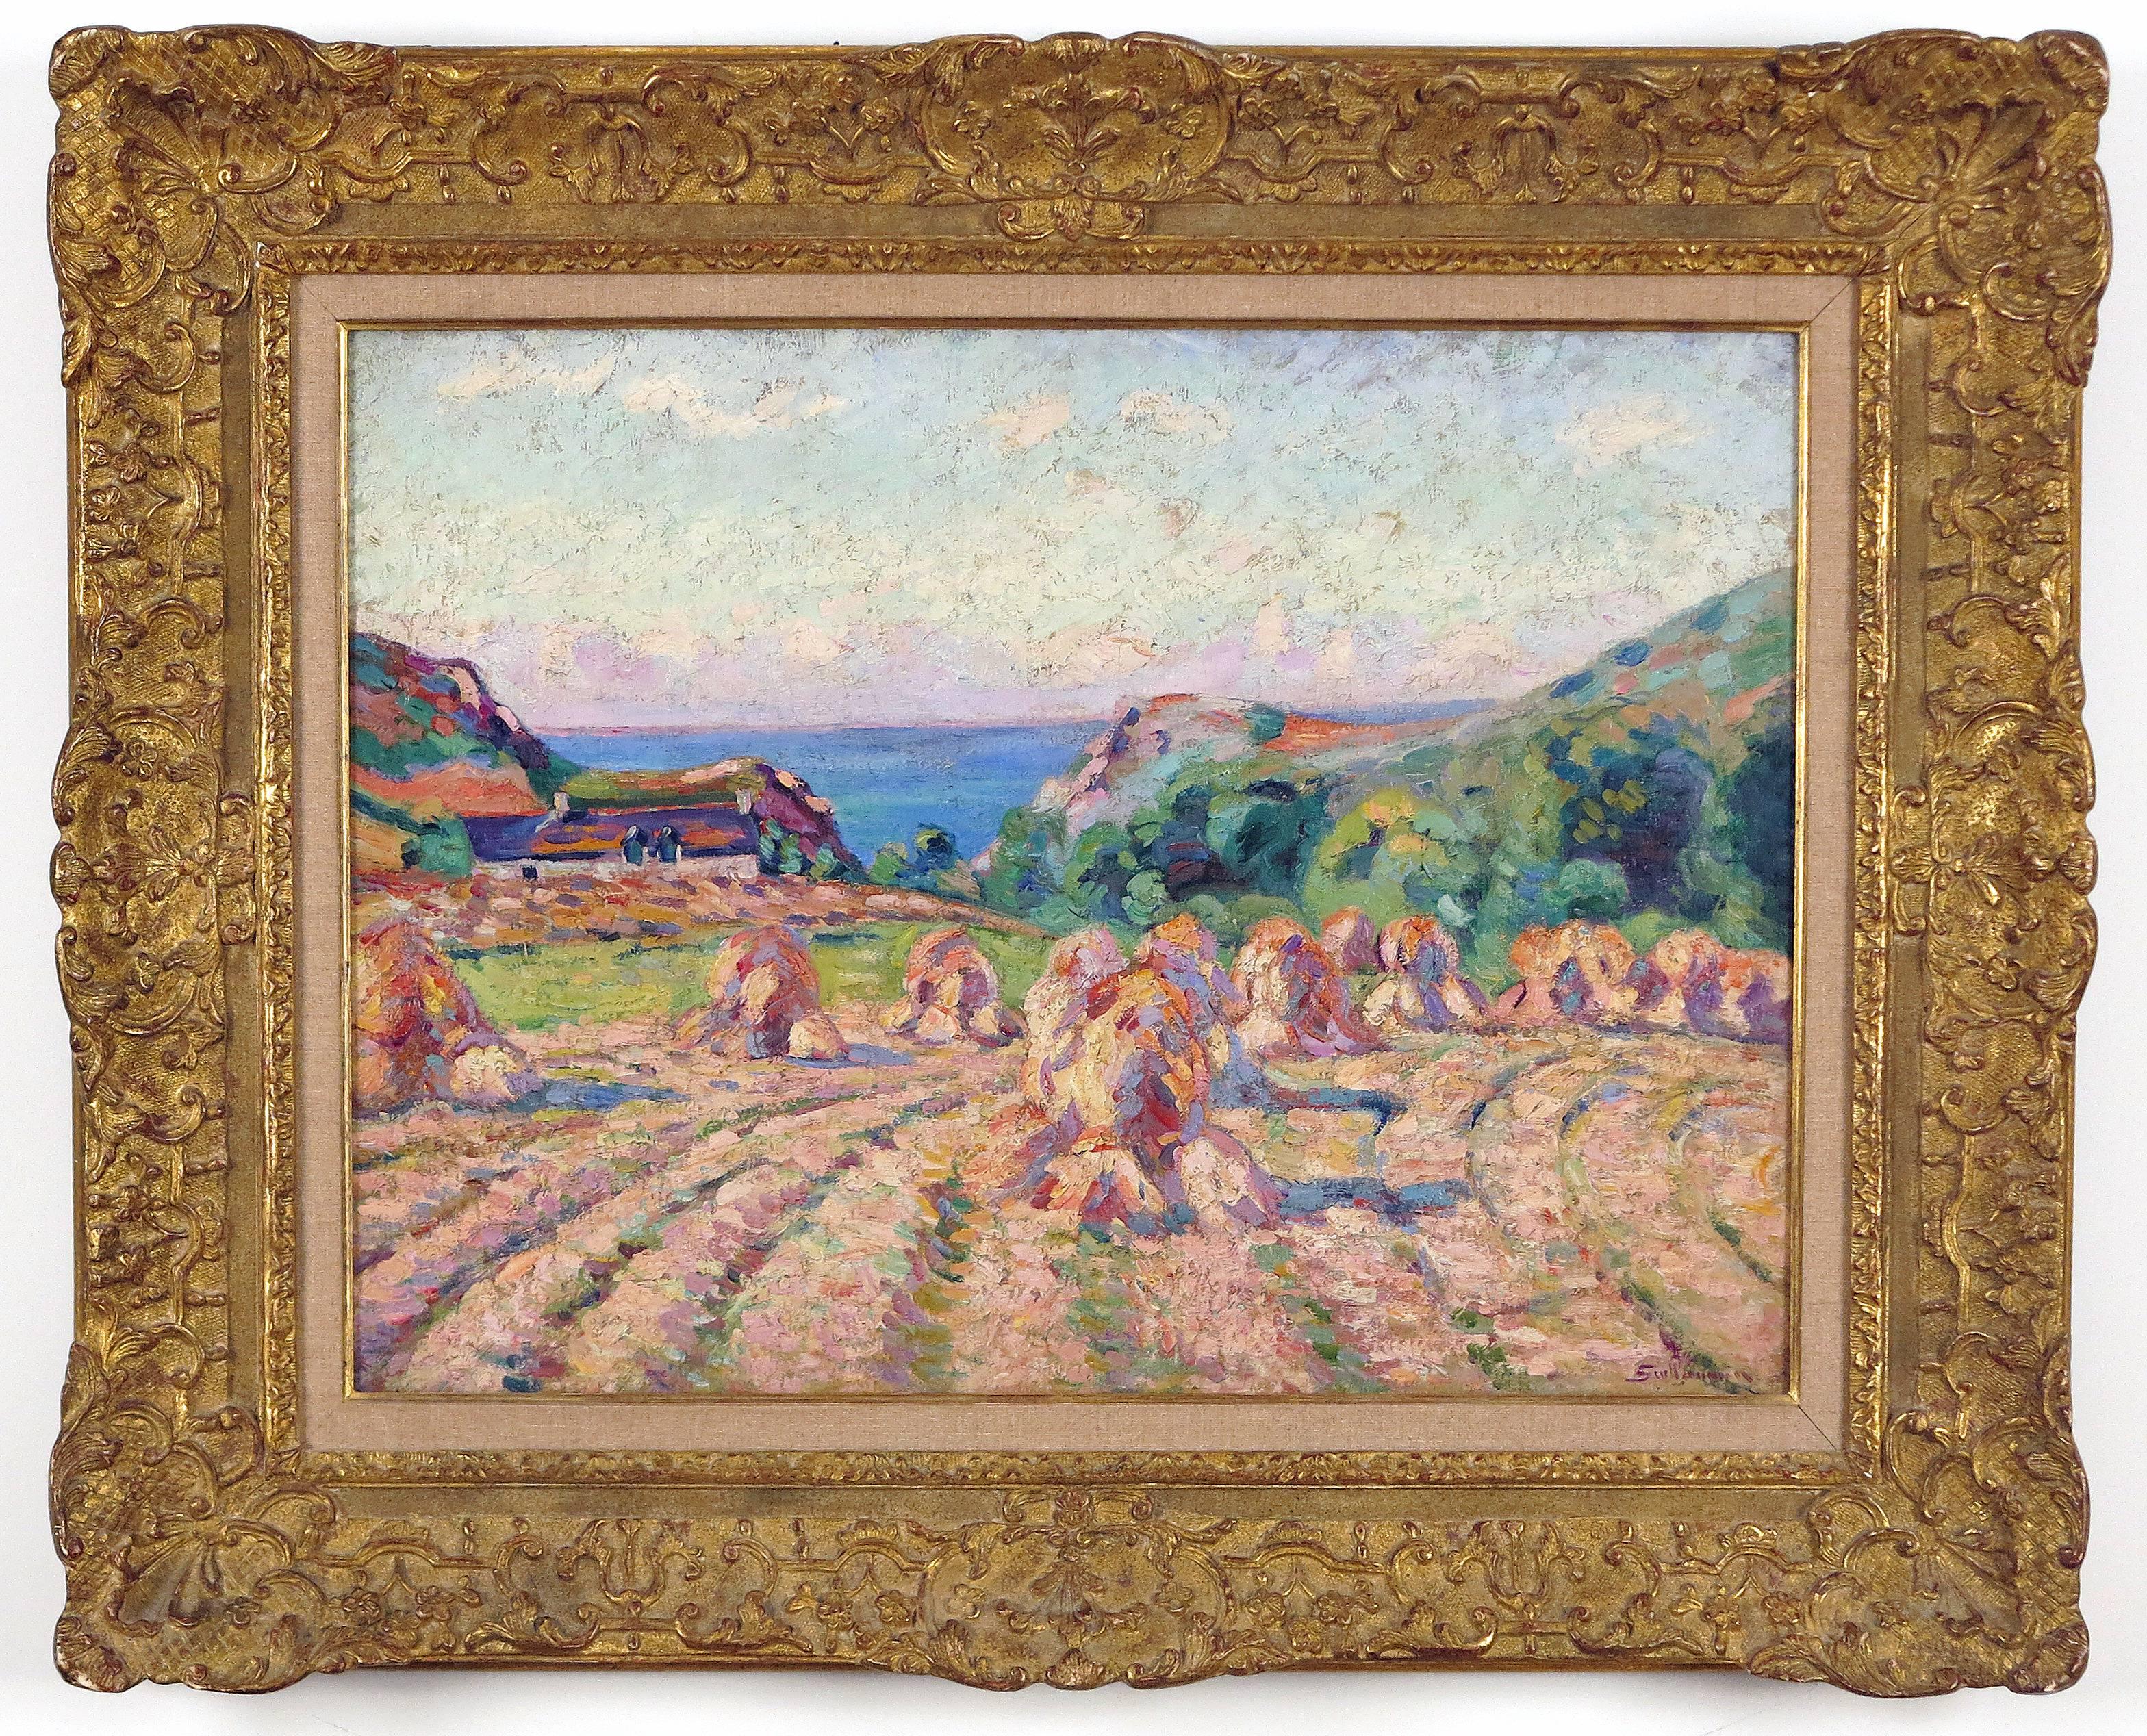 Haystacks - Painting by Armand Guillaumin